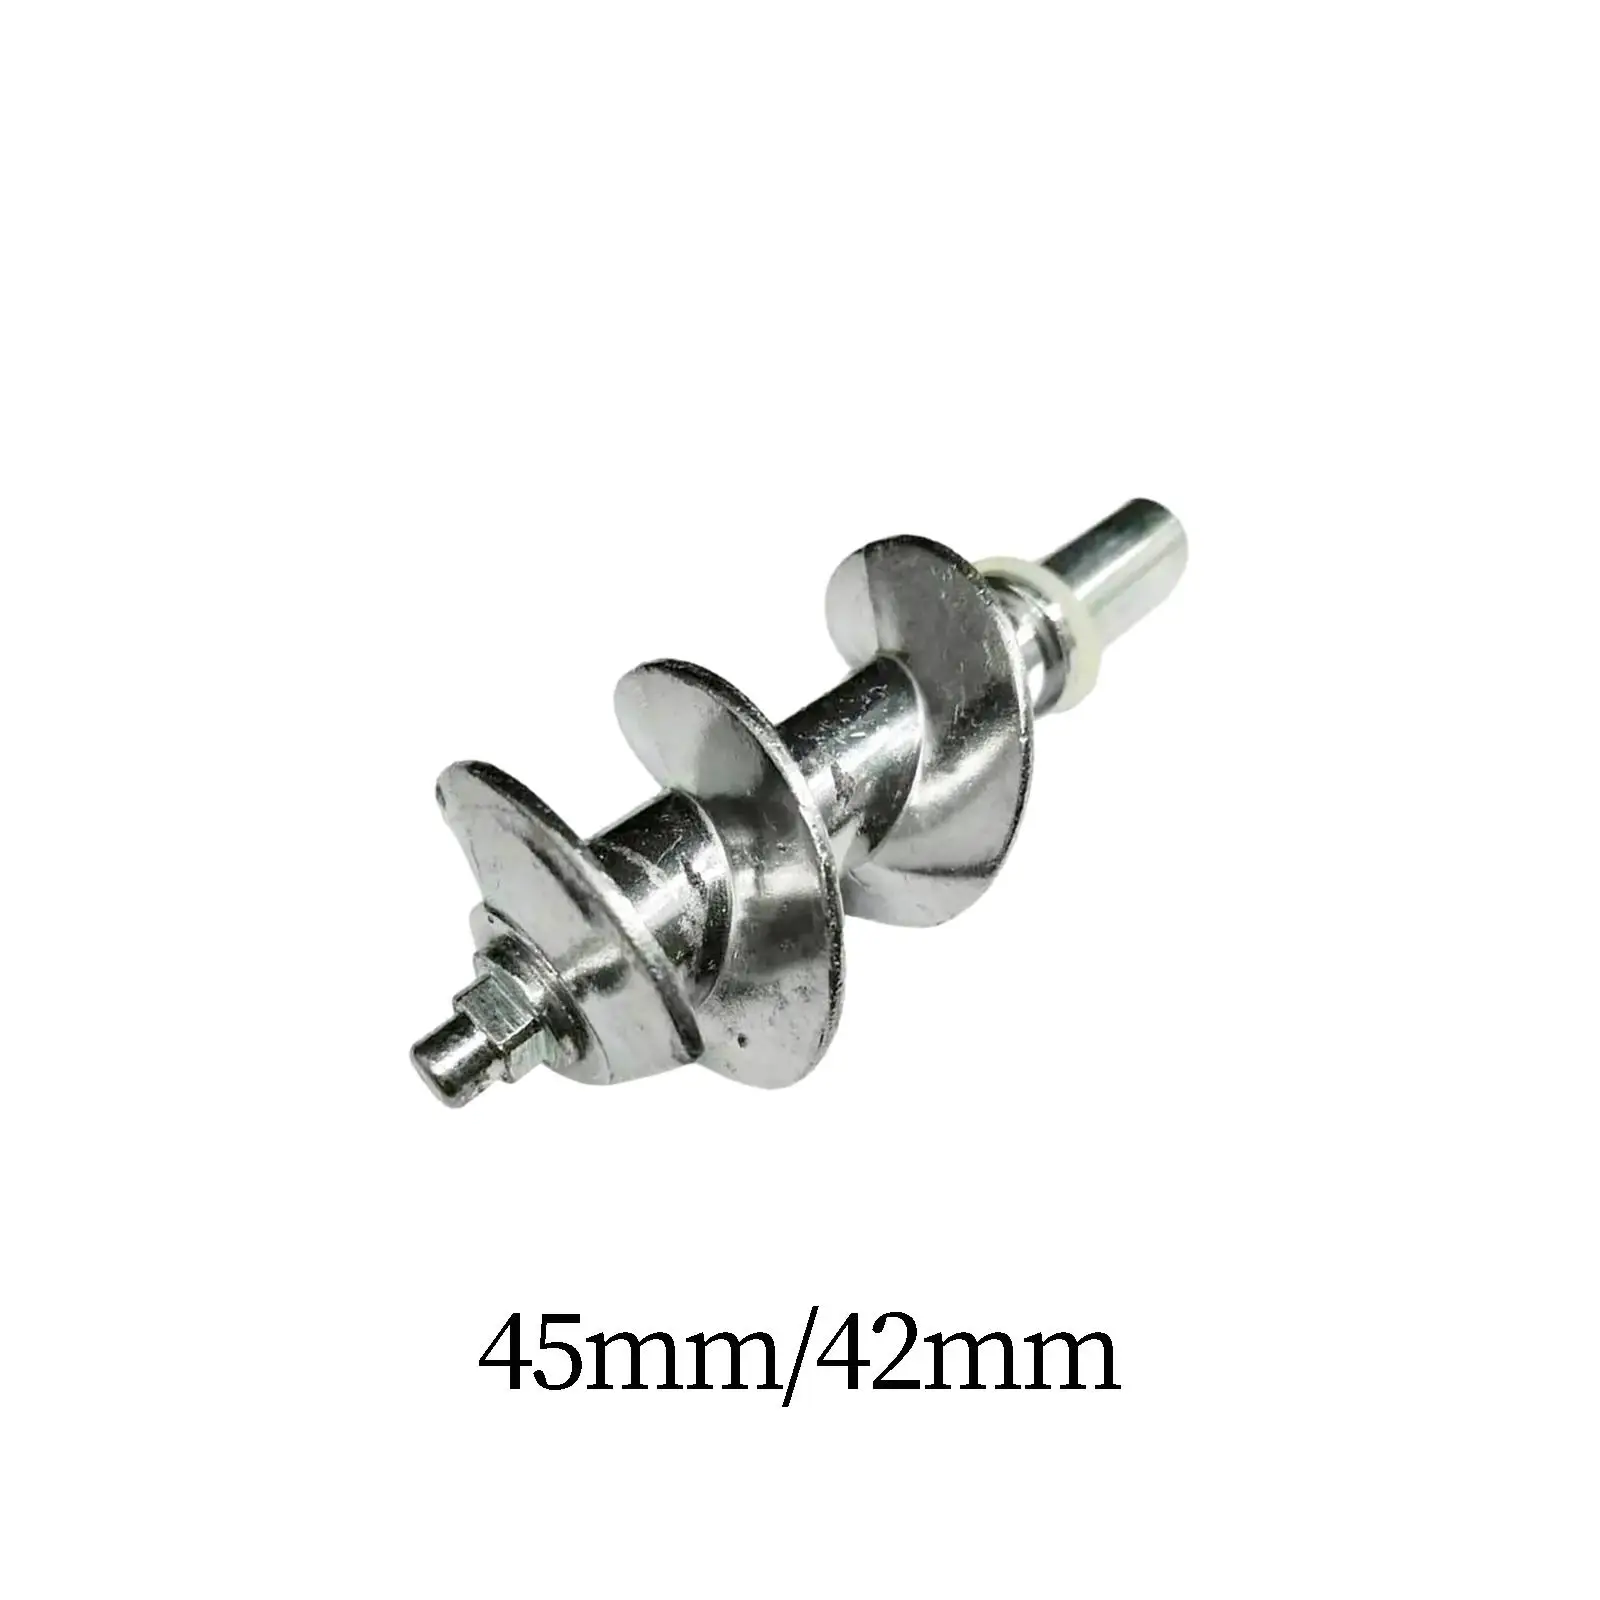 Meat Grinder Screw Auger Duable Accessories Replacement Meat Grinder Screw Attachment for PN005 G20prpwdr MG1501 Pmg 2008 MG1000